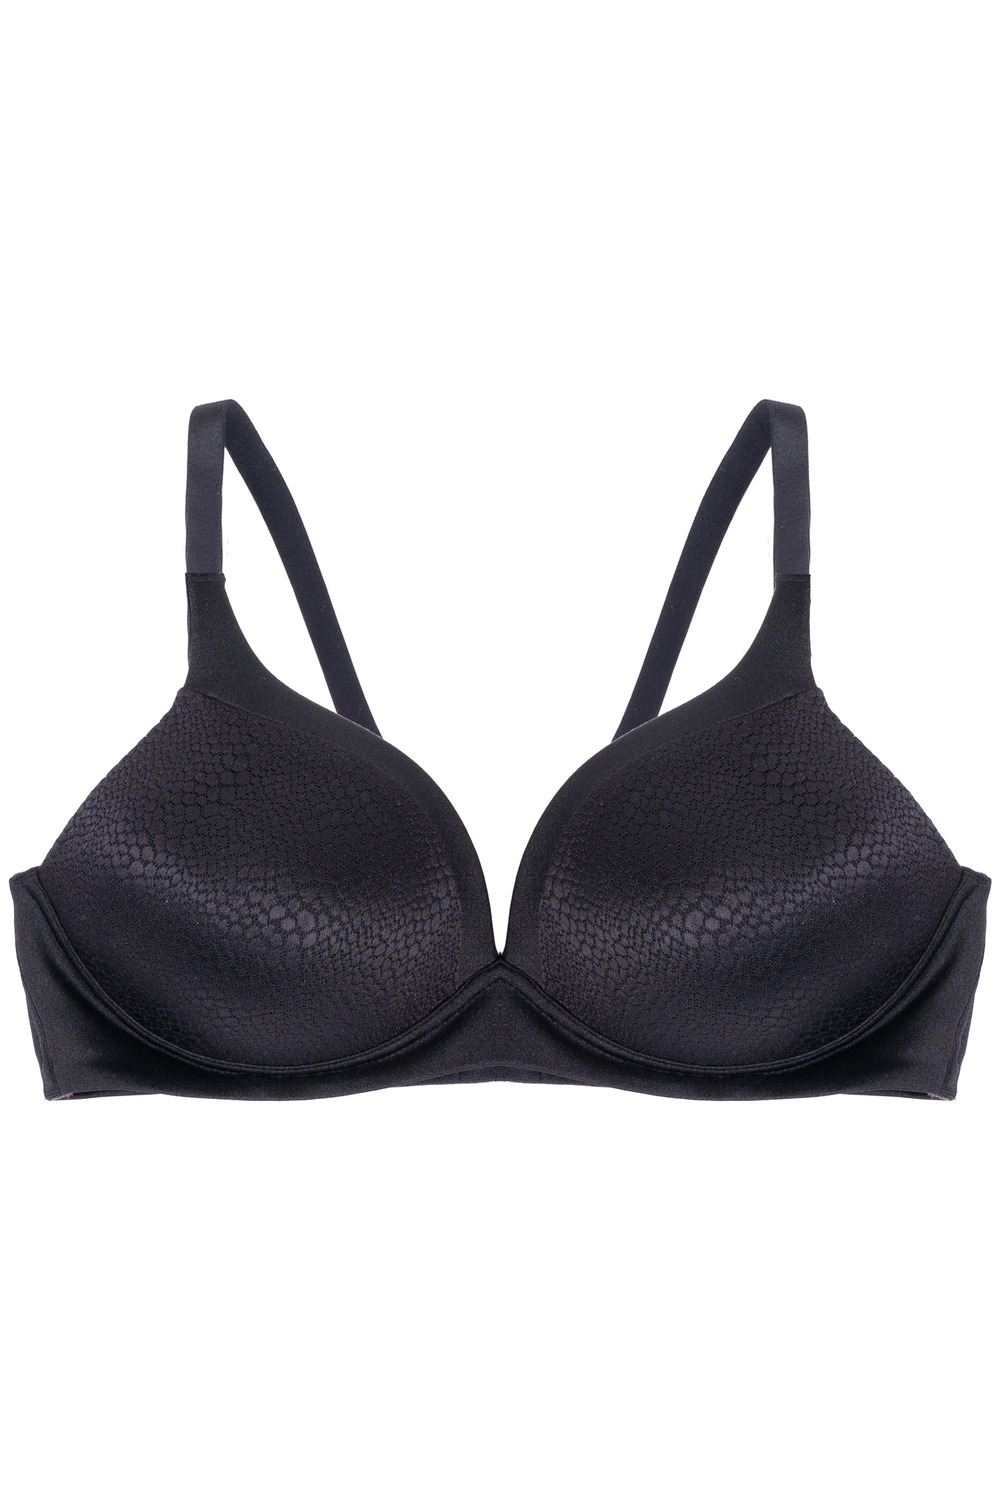 Warners Blissful Benefits Wireless Bra Size 36B New With Tags - $15 New  With Tags - From Shelia